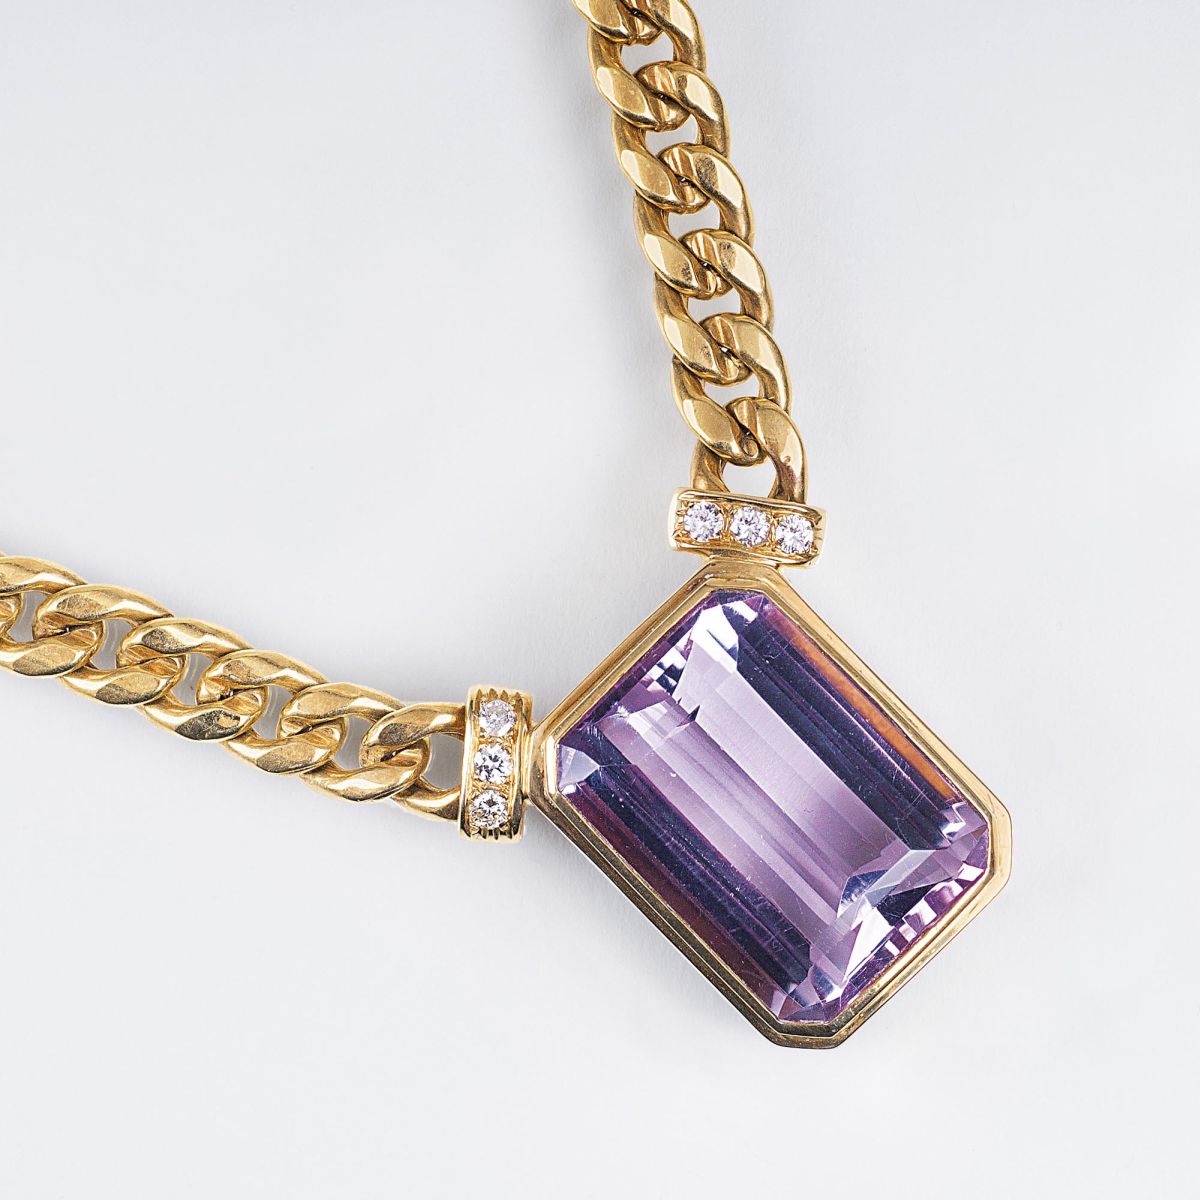 A Gold Necklace with Amethyst